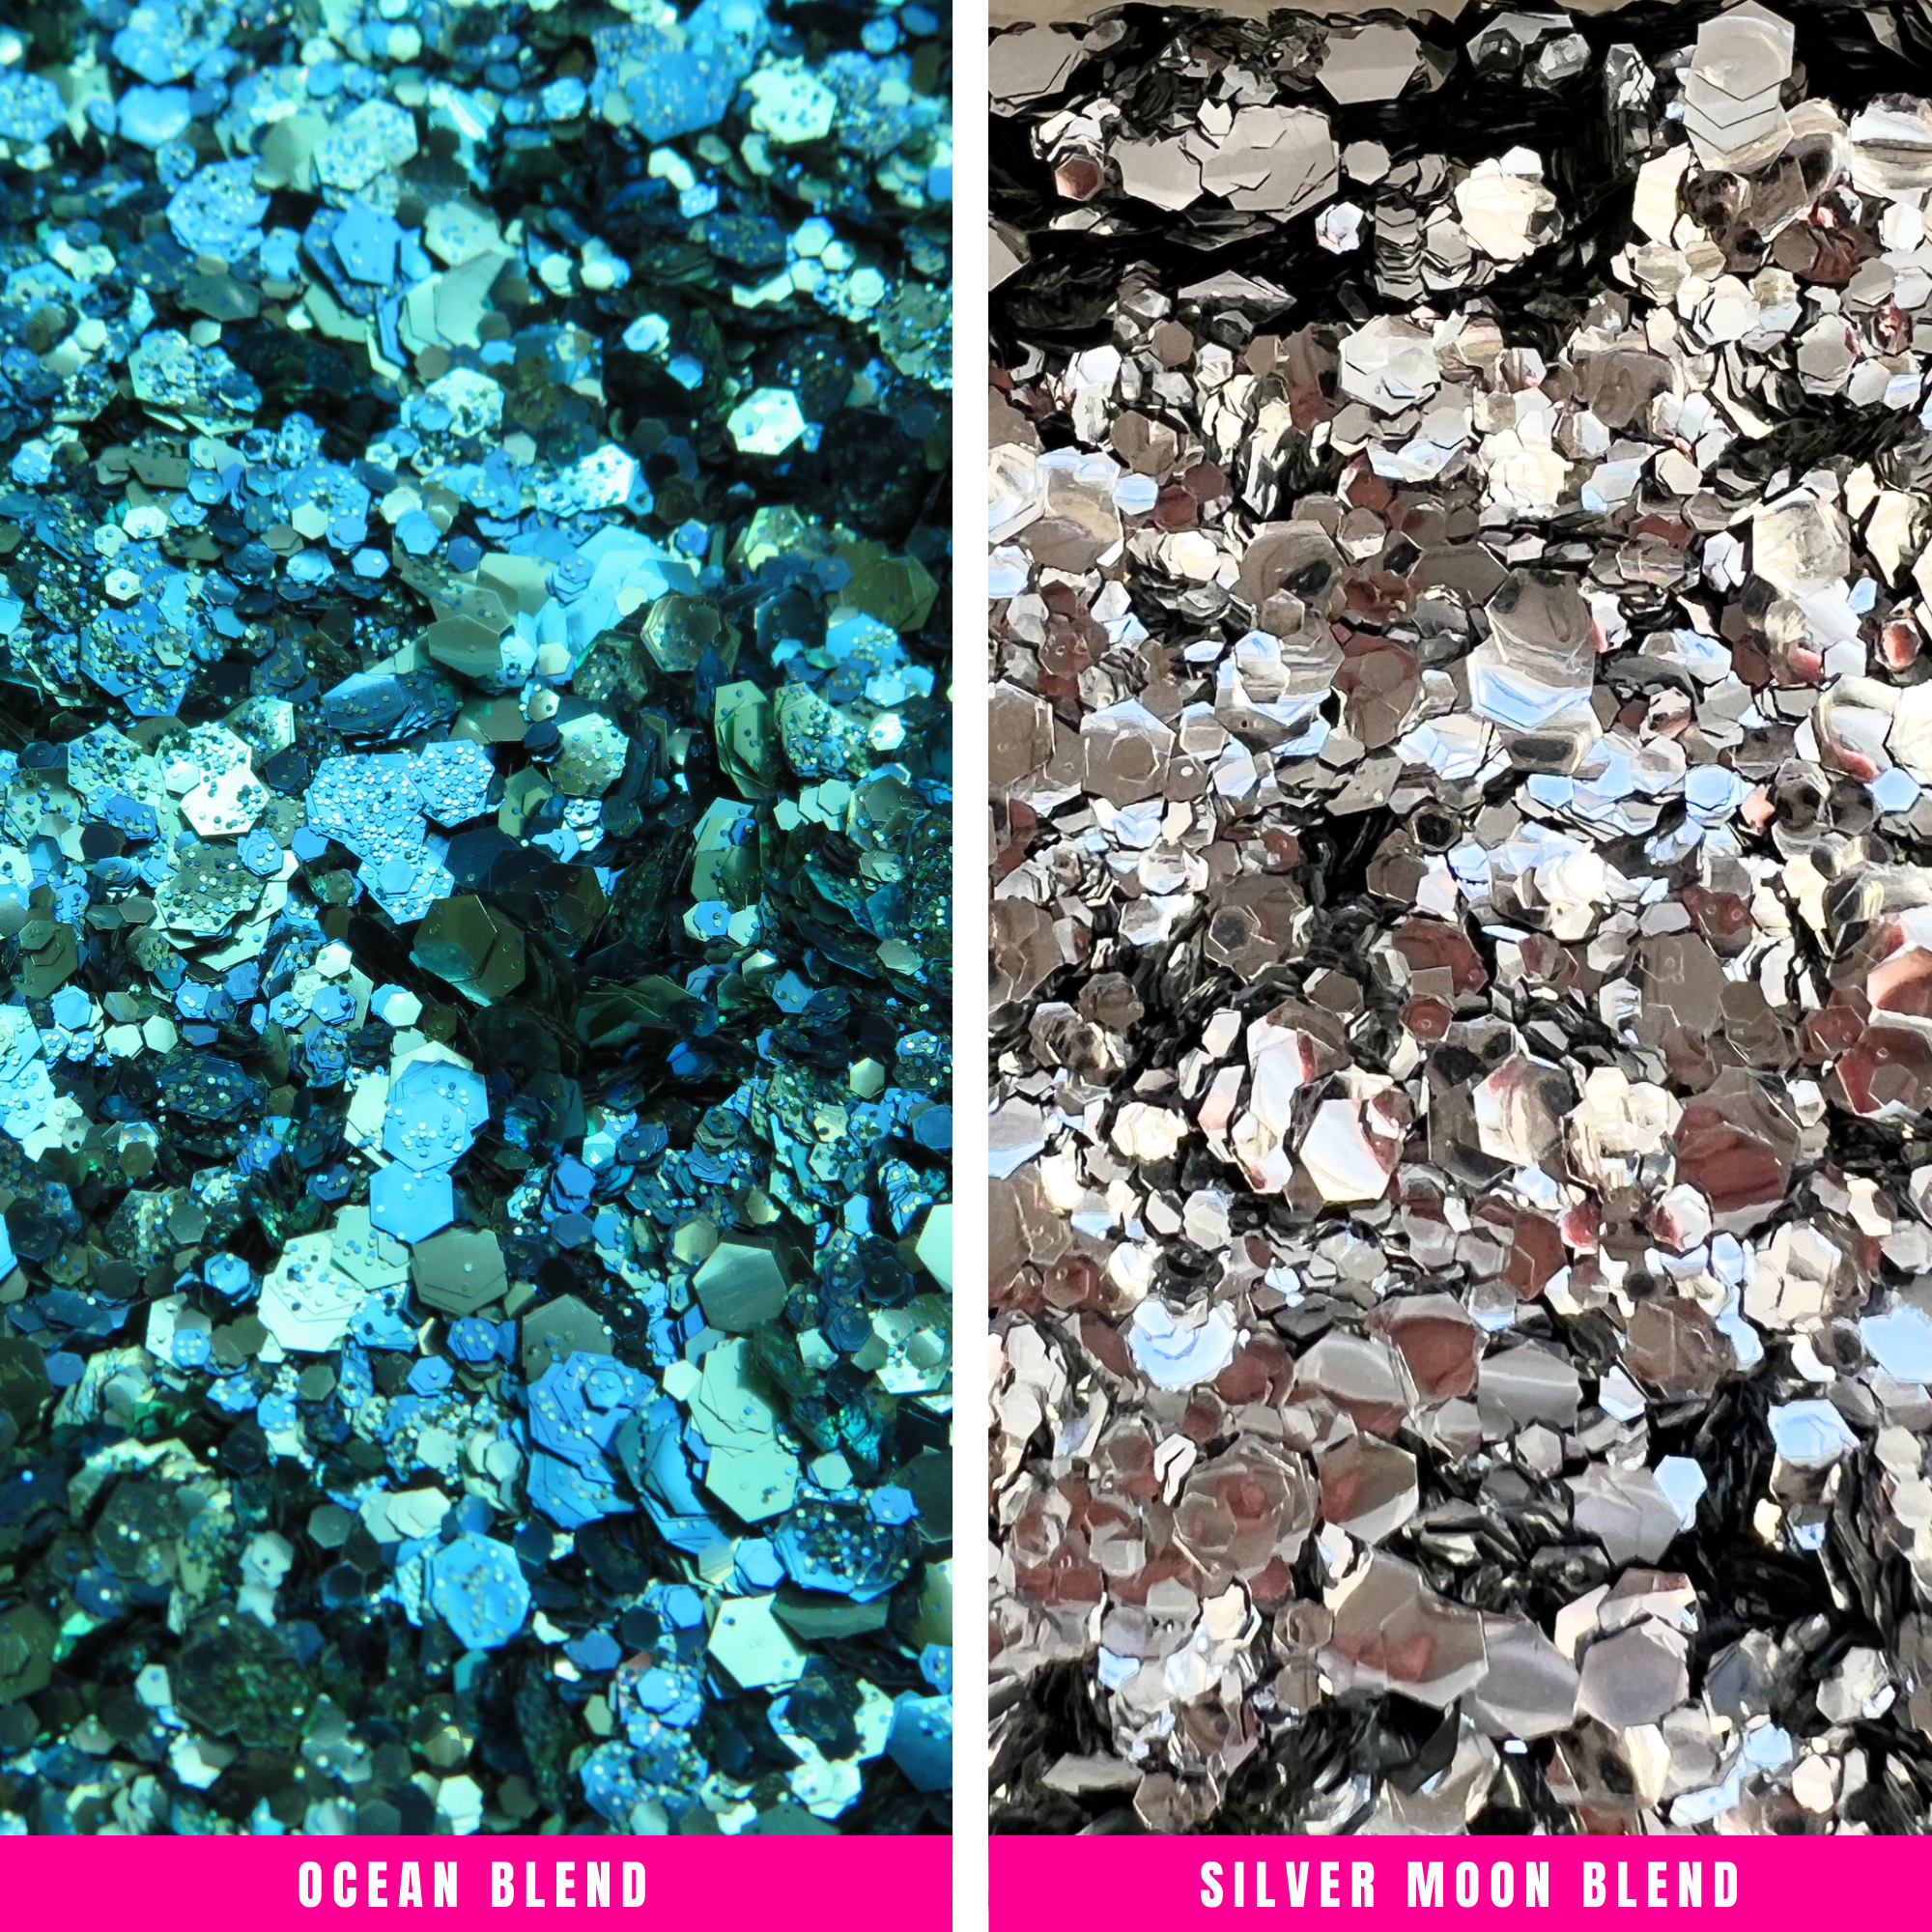 Ocean and Silver moon blends of biodegradable cosmetic glitter